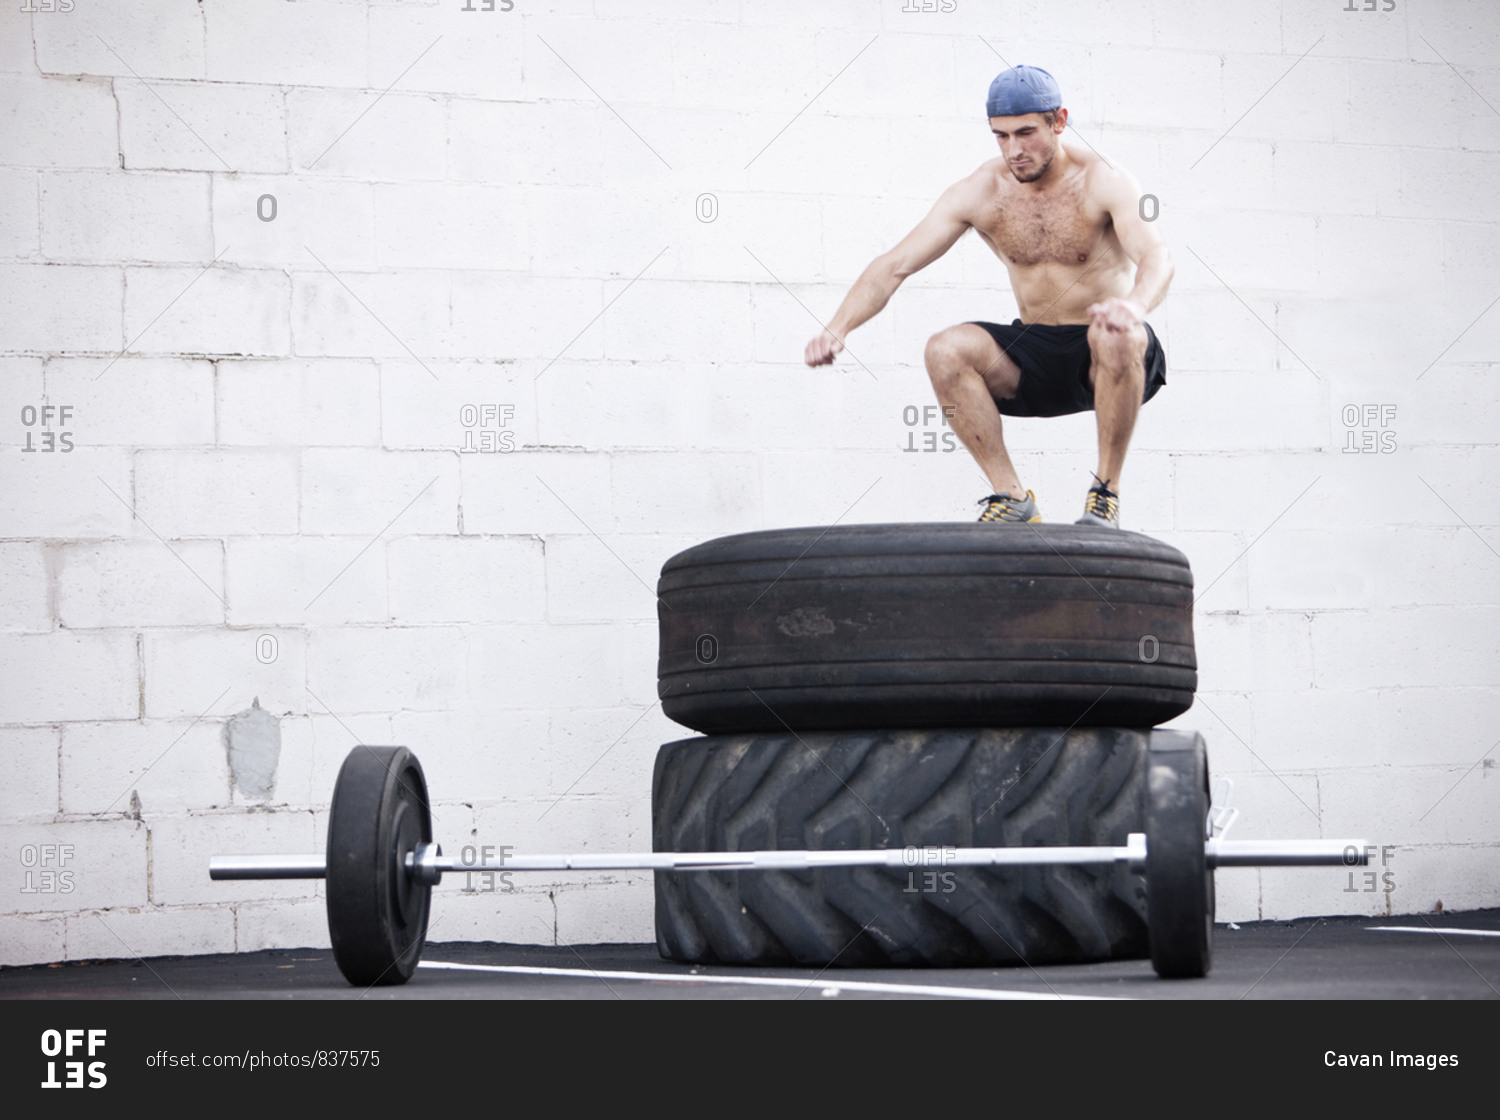 A young man jumps on tires while doing a fitness boot camp.